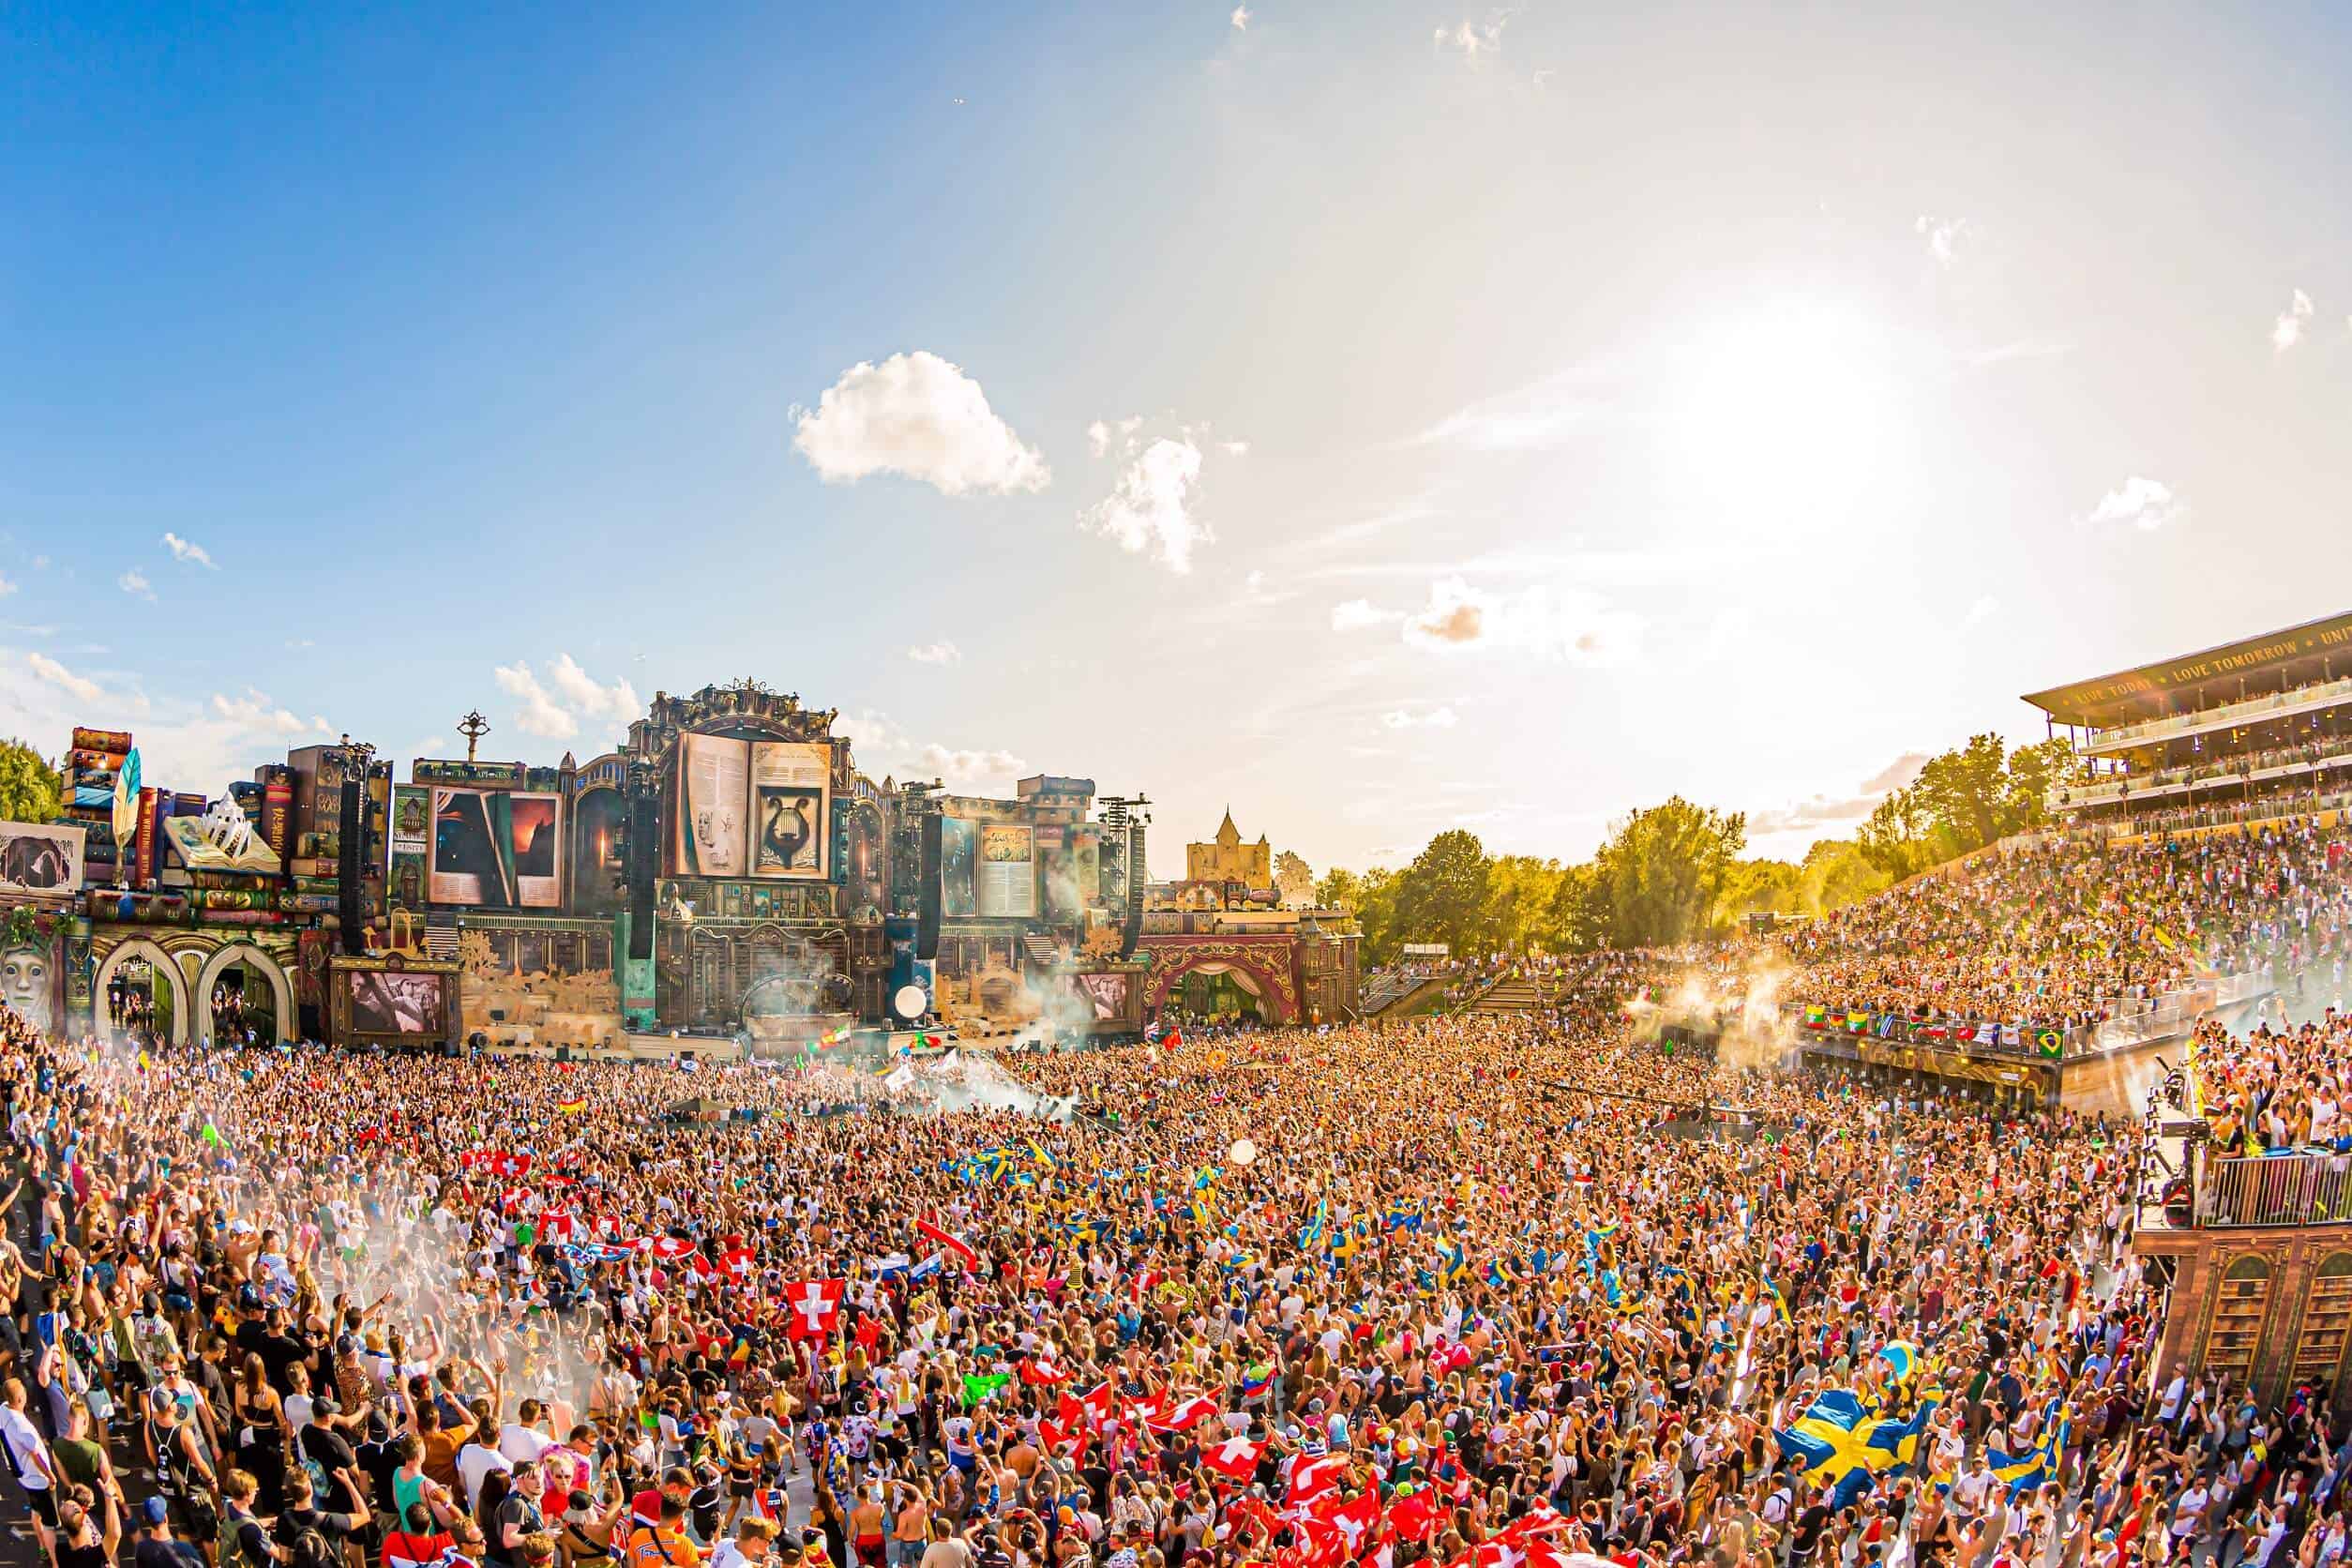 Tomorrowland in the process of developing a new fantasy fiction trilogy